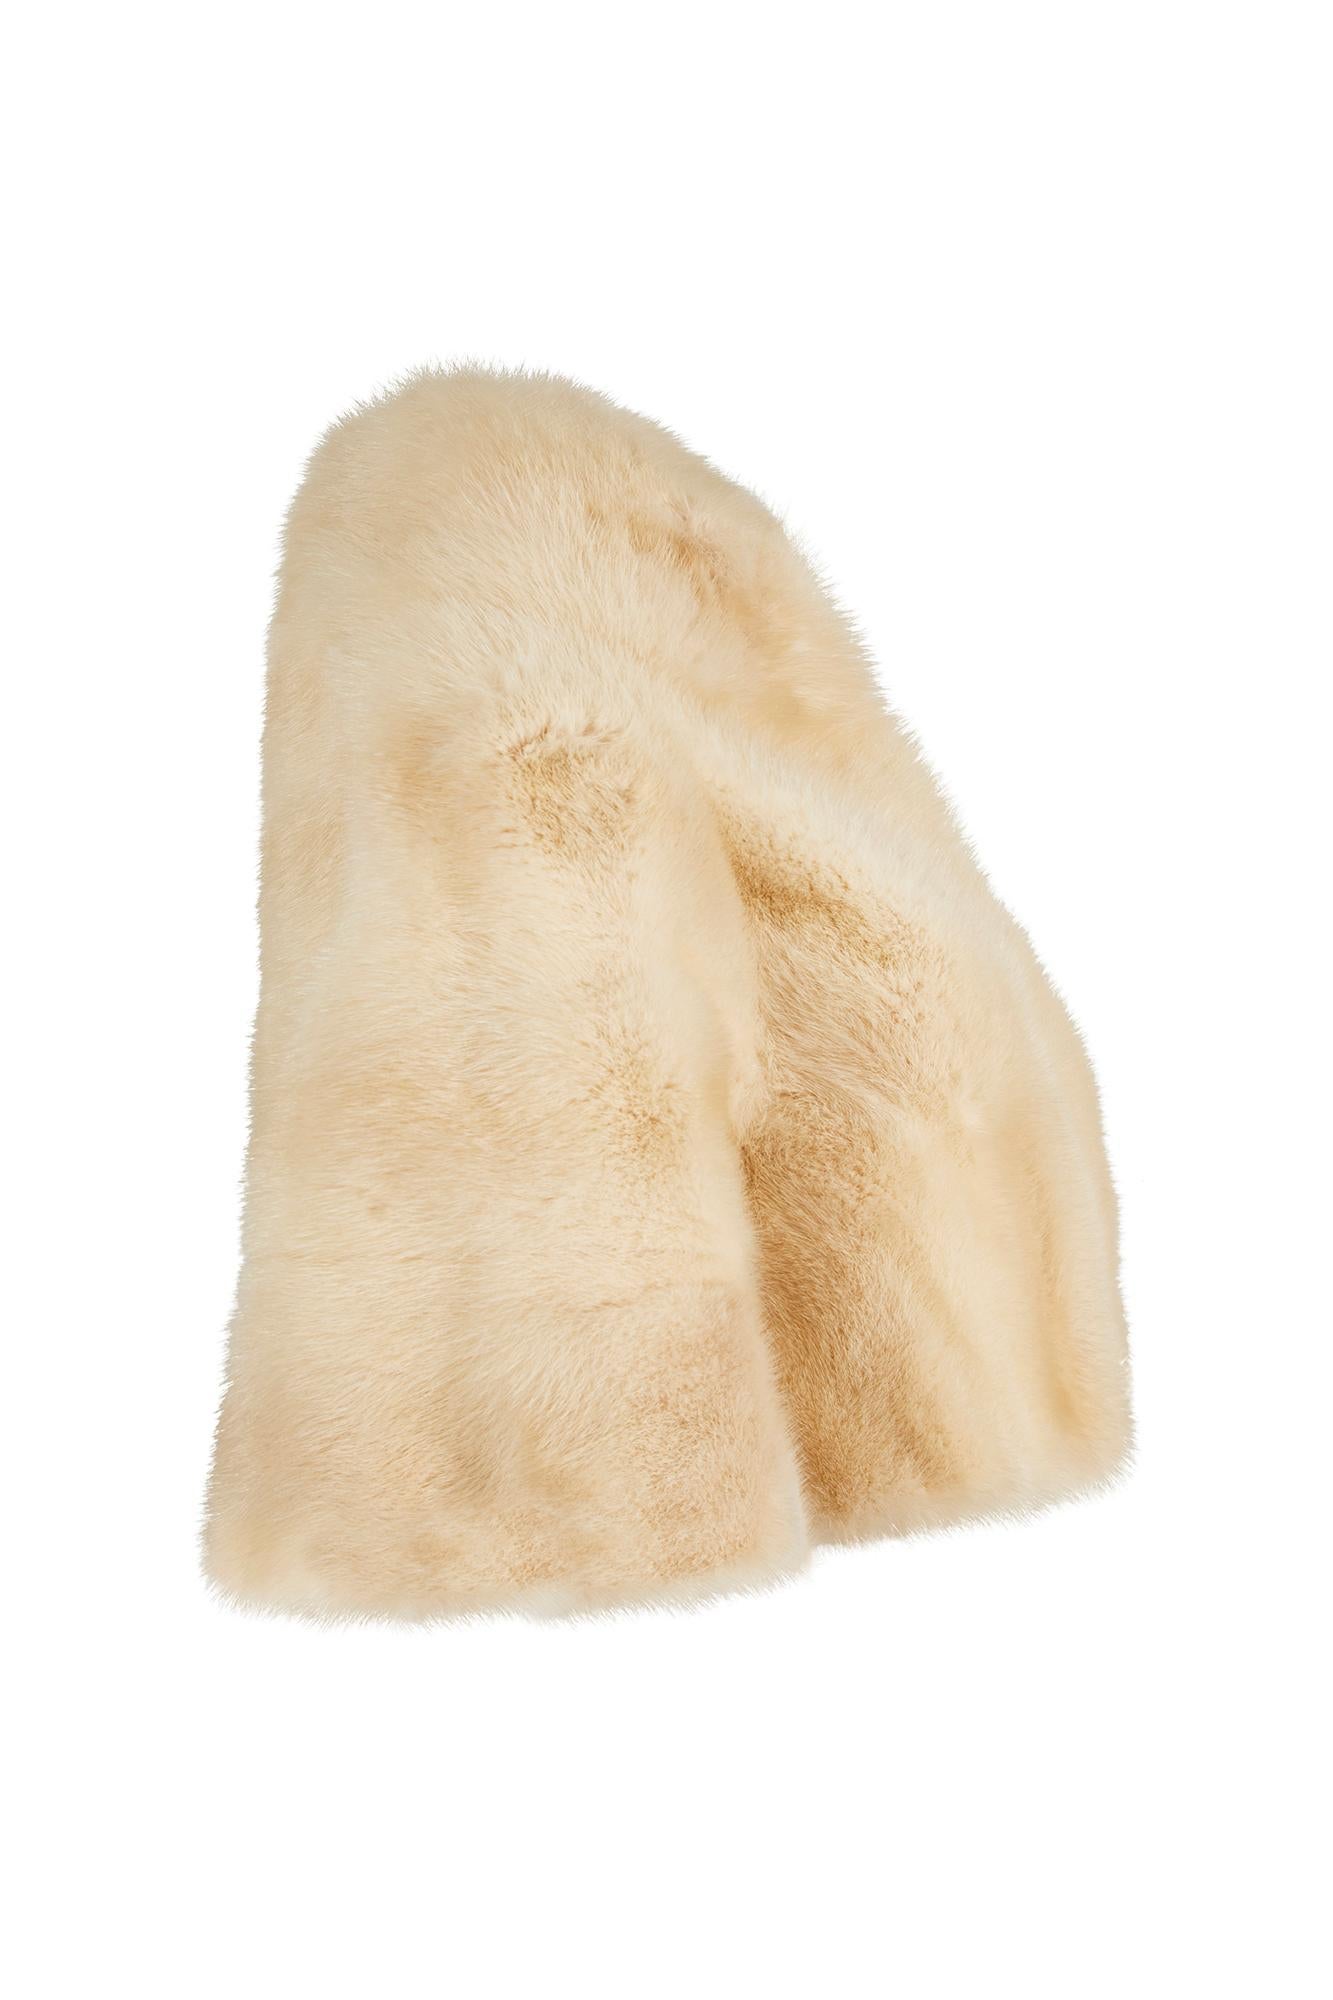 This exceptional 1950s silk lined tourmaline mink fur caplet is by American mink fur furrier collective EMBA, a group that specialised in rare and sought after shades of mink pelt for high end markets. This pale ivory or 